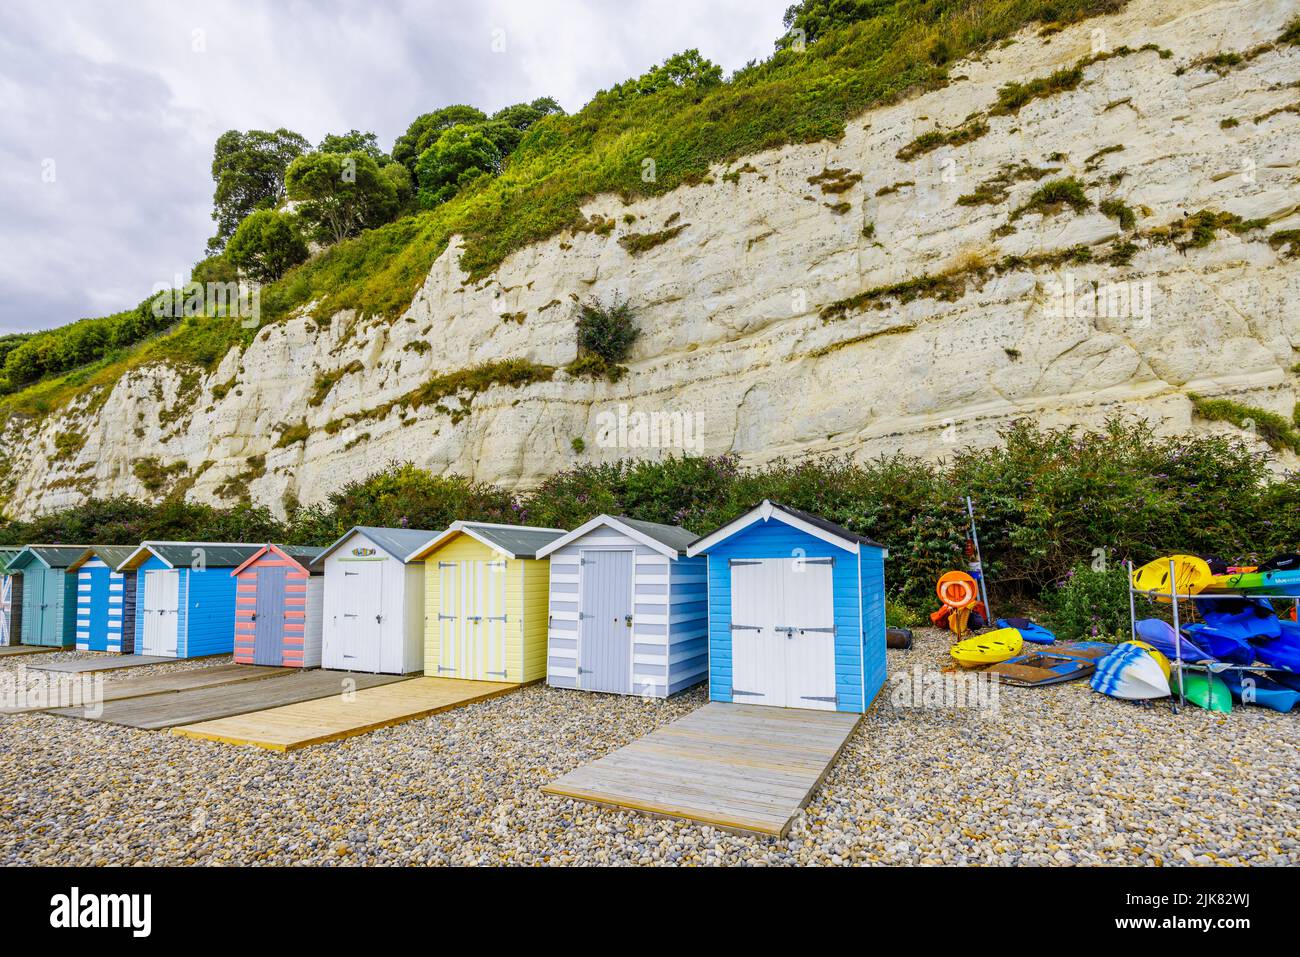 A row of beach huts at the foot of chalk cliffs at Beer, a small coastal village on Lyme Bay in the Jurassic Coast of East Dorset, south-west England Stock Photo